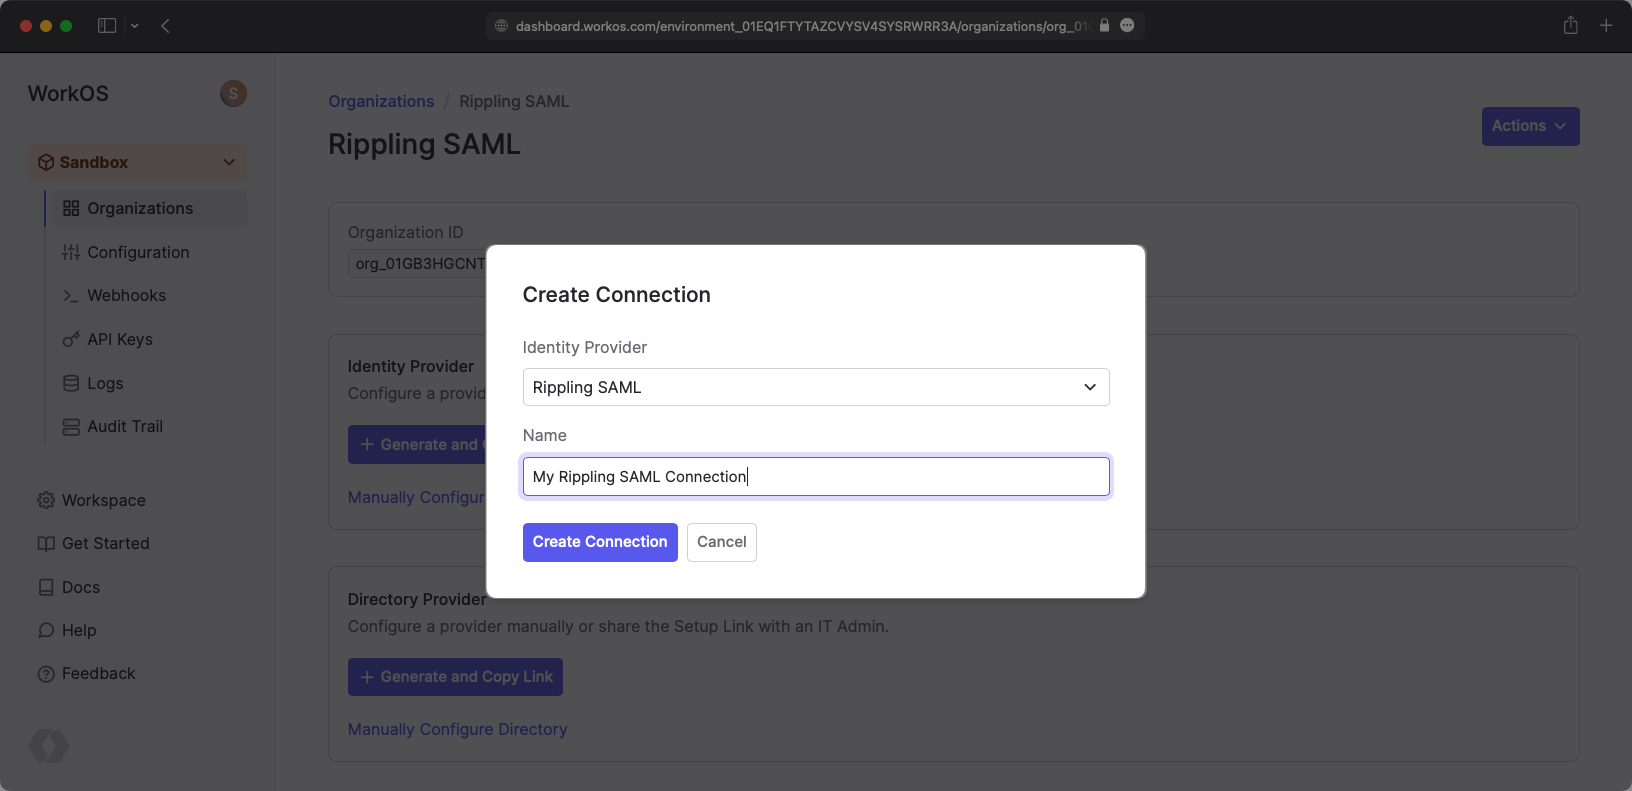 A screenshot showing the "Create Connection" modal with options configured in the WorkOS dashboard.